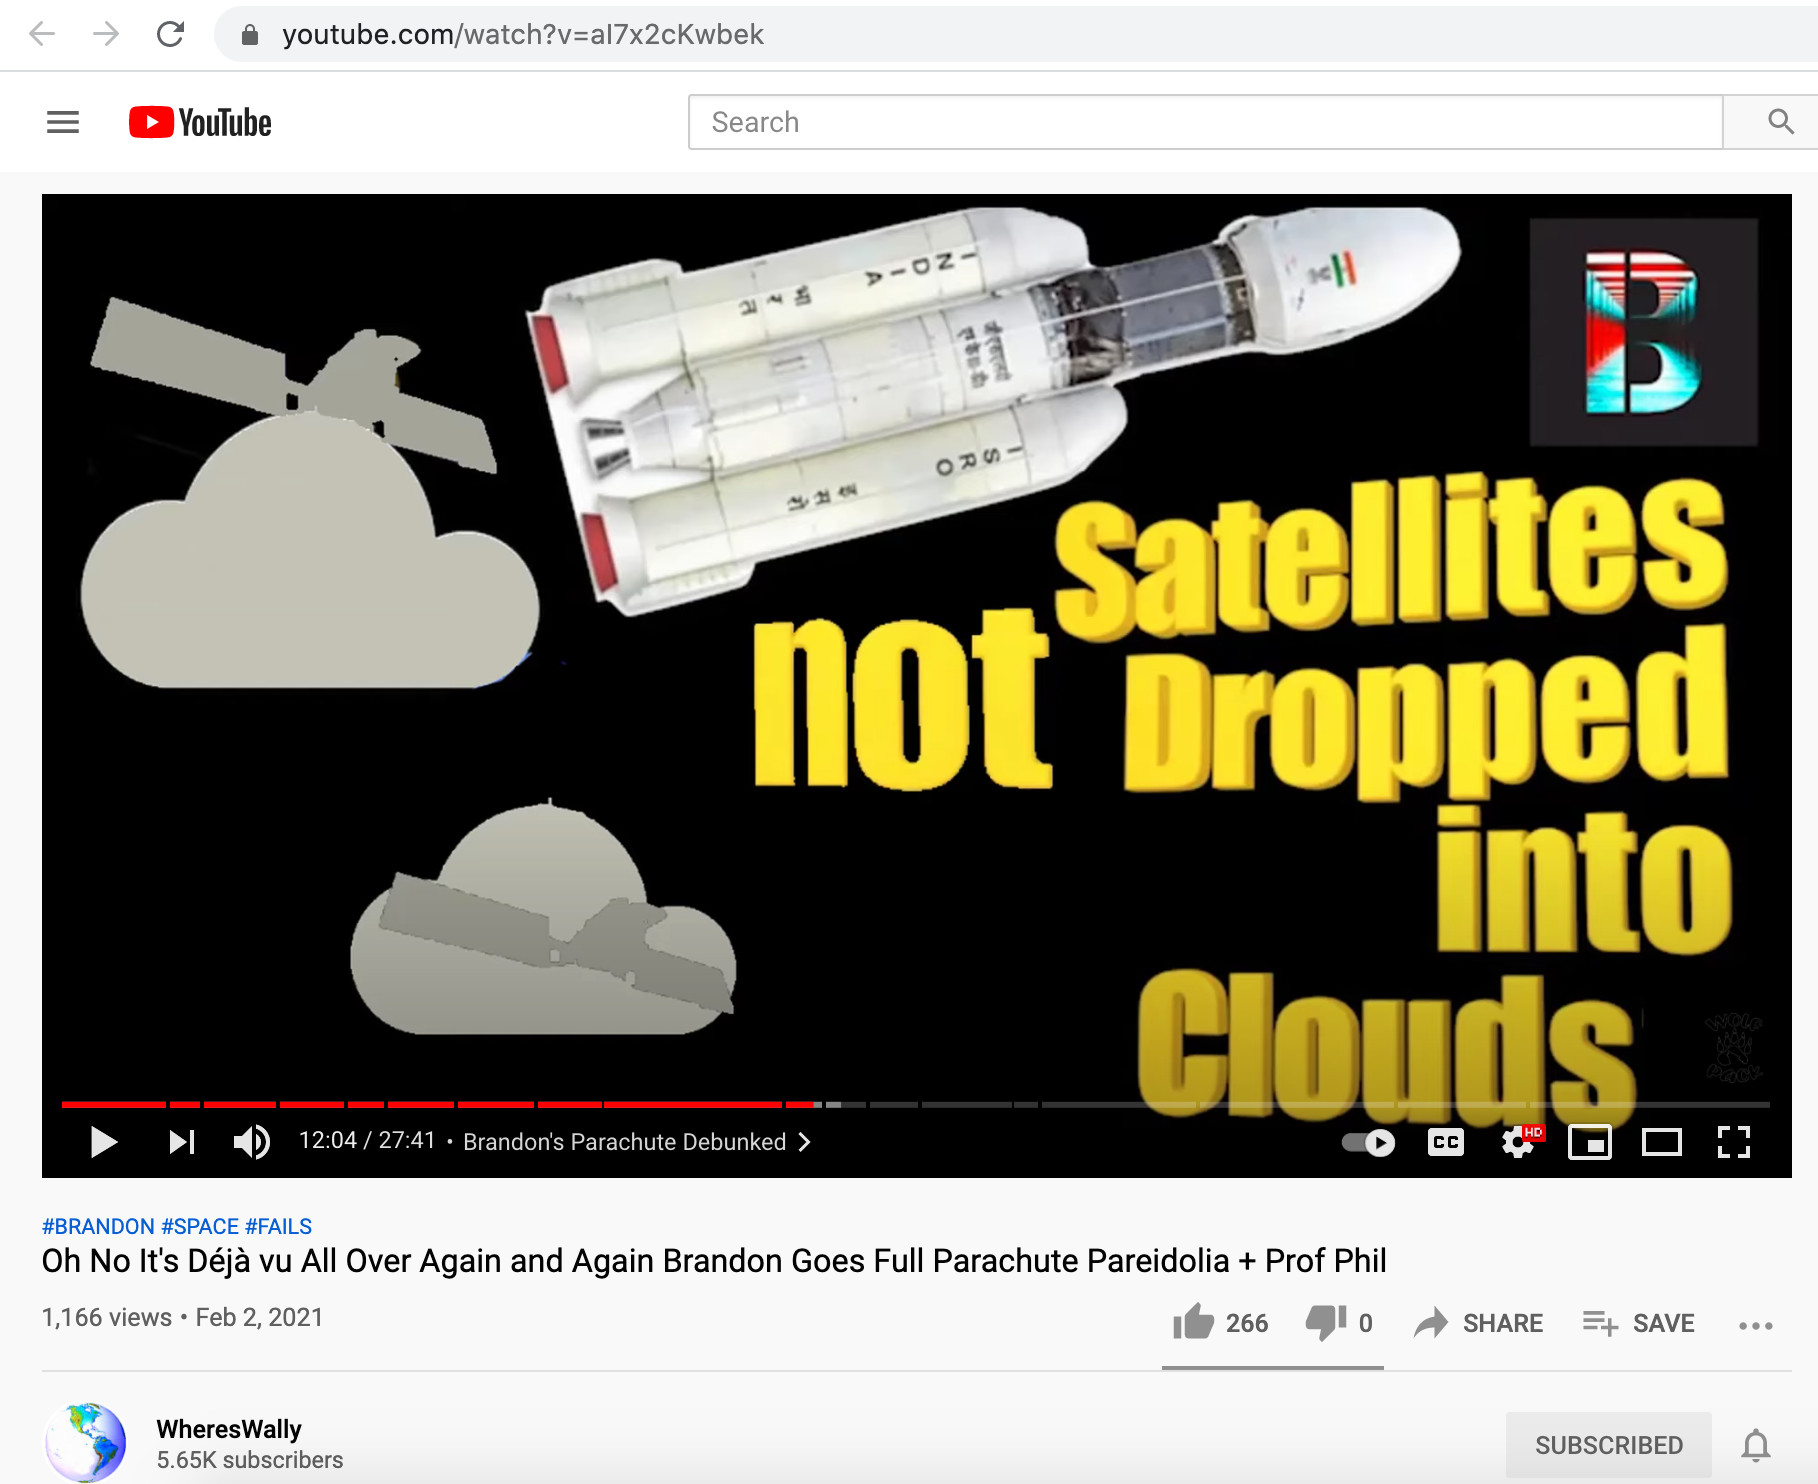 Satellites not dropping into clouds 2.jpg